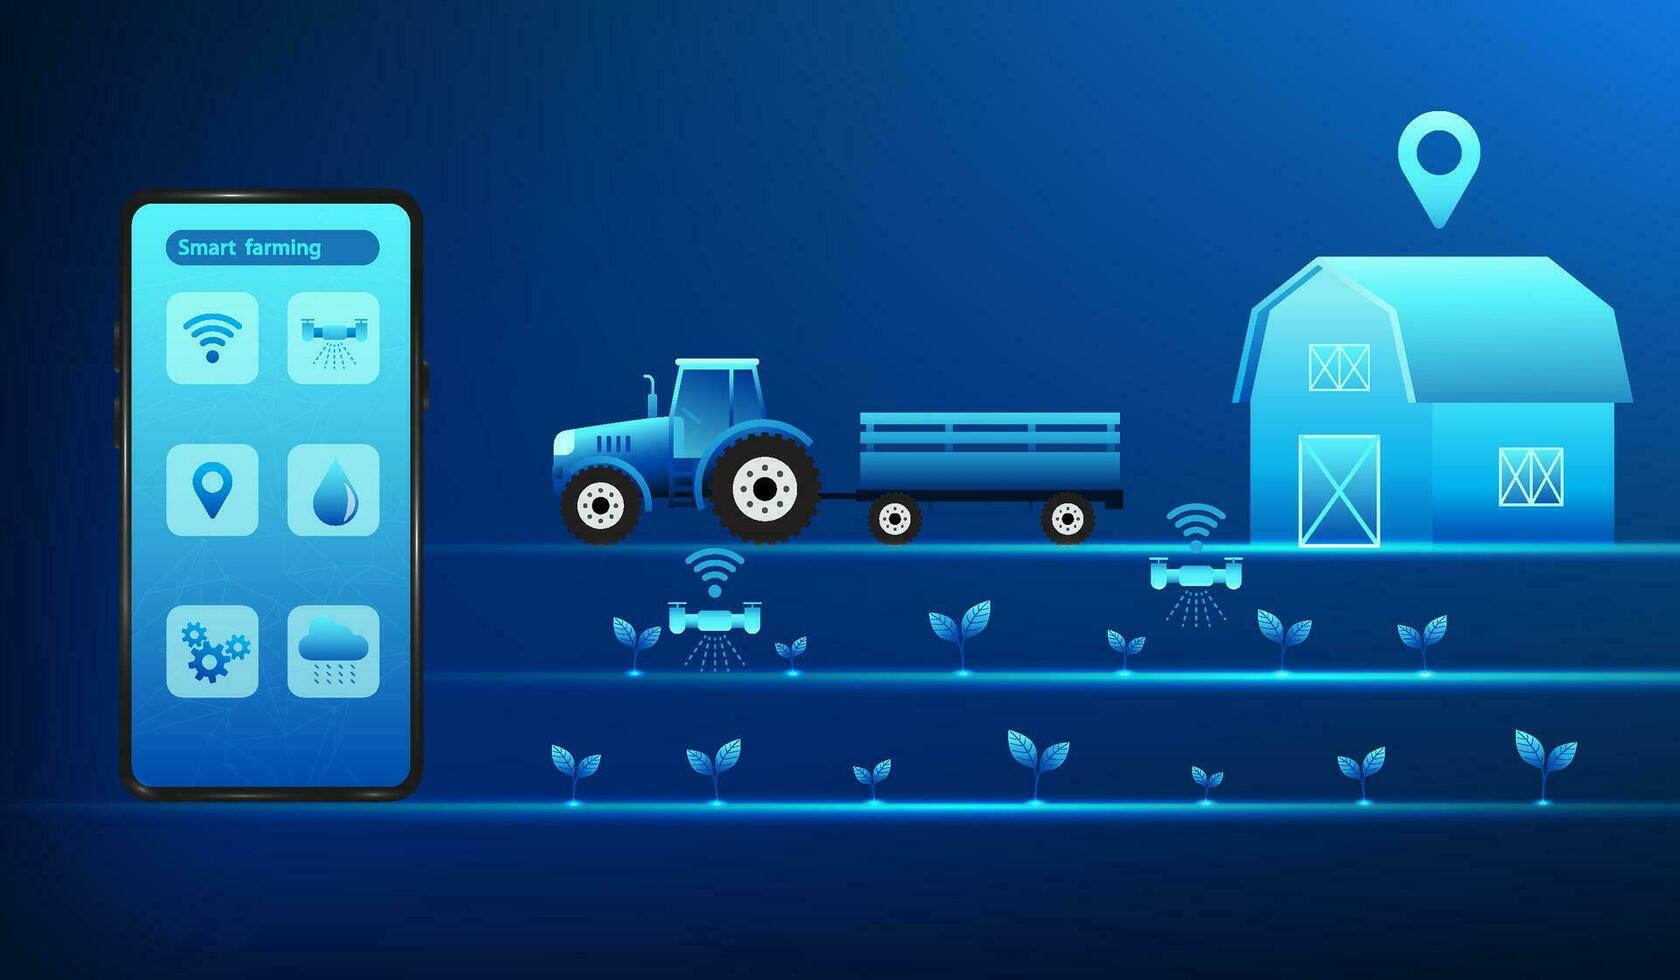 Smart Farm, a mobile phone that controls the operation of agricultural farms Measure the growth of production, take care of crops, and temperature Bring technology in to help with farming. Vector